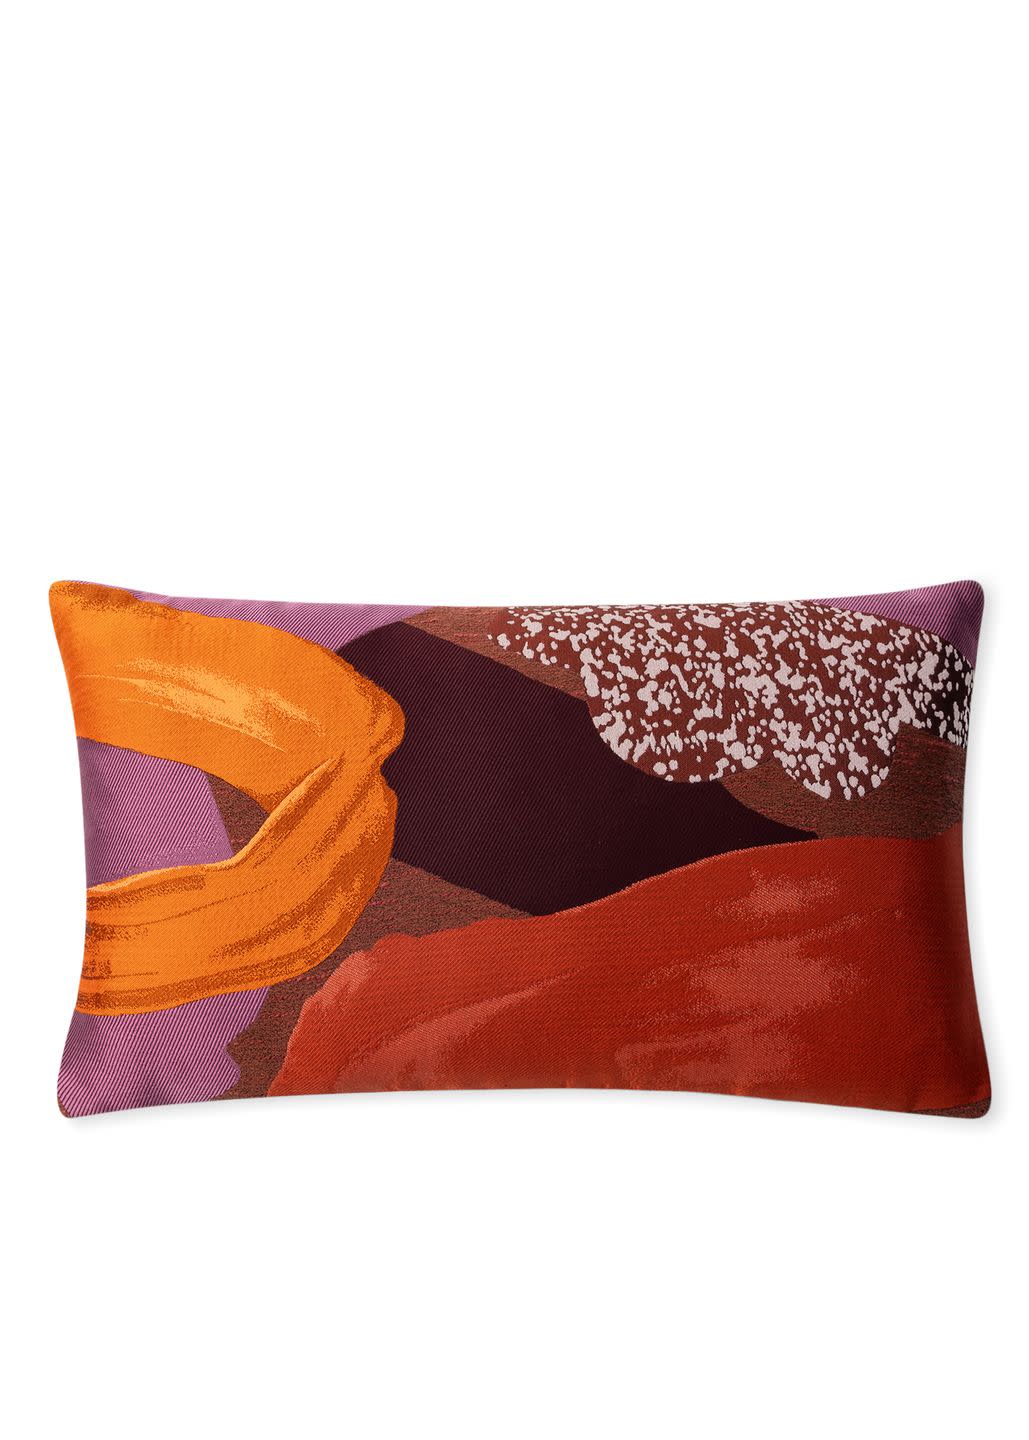 long cushion in oranges red and purples